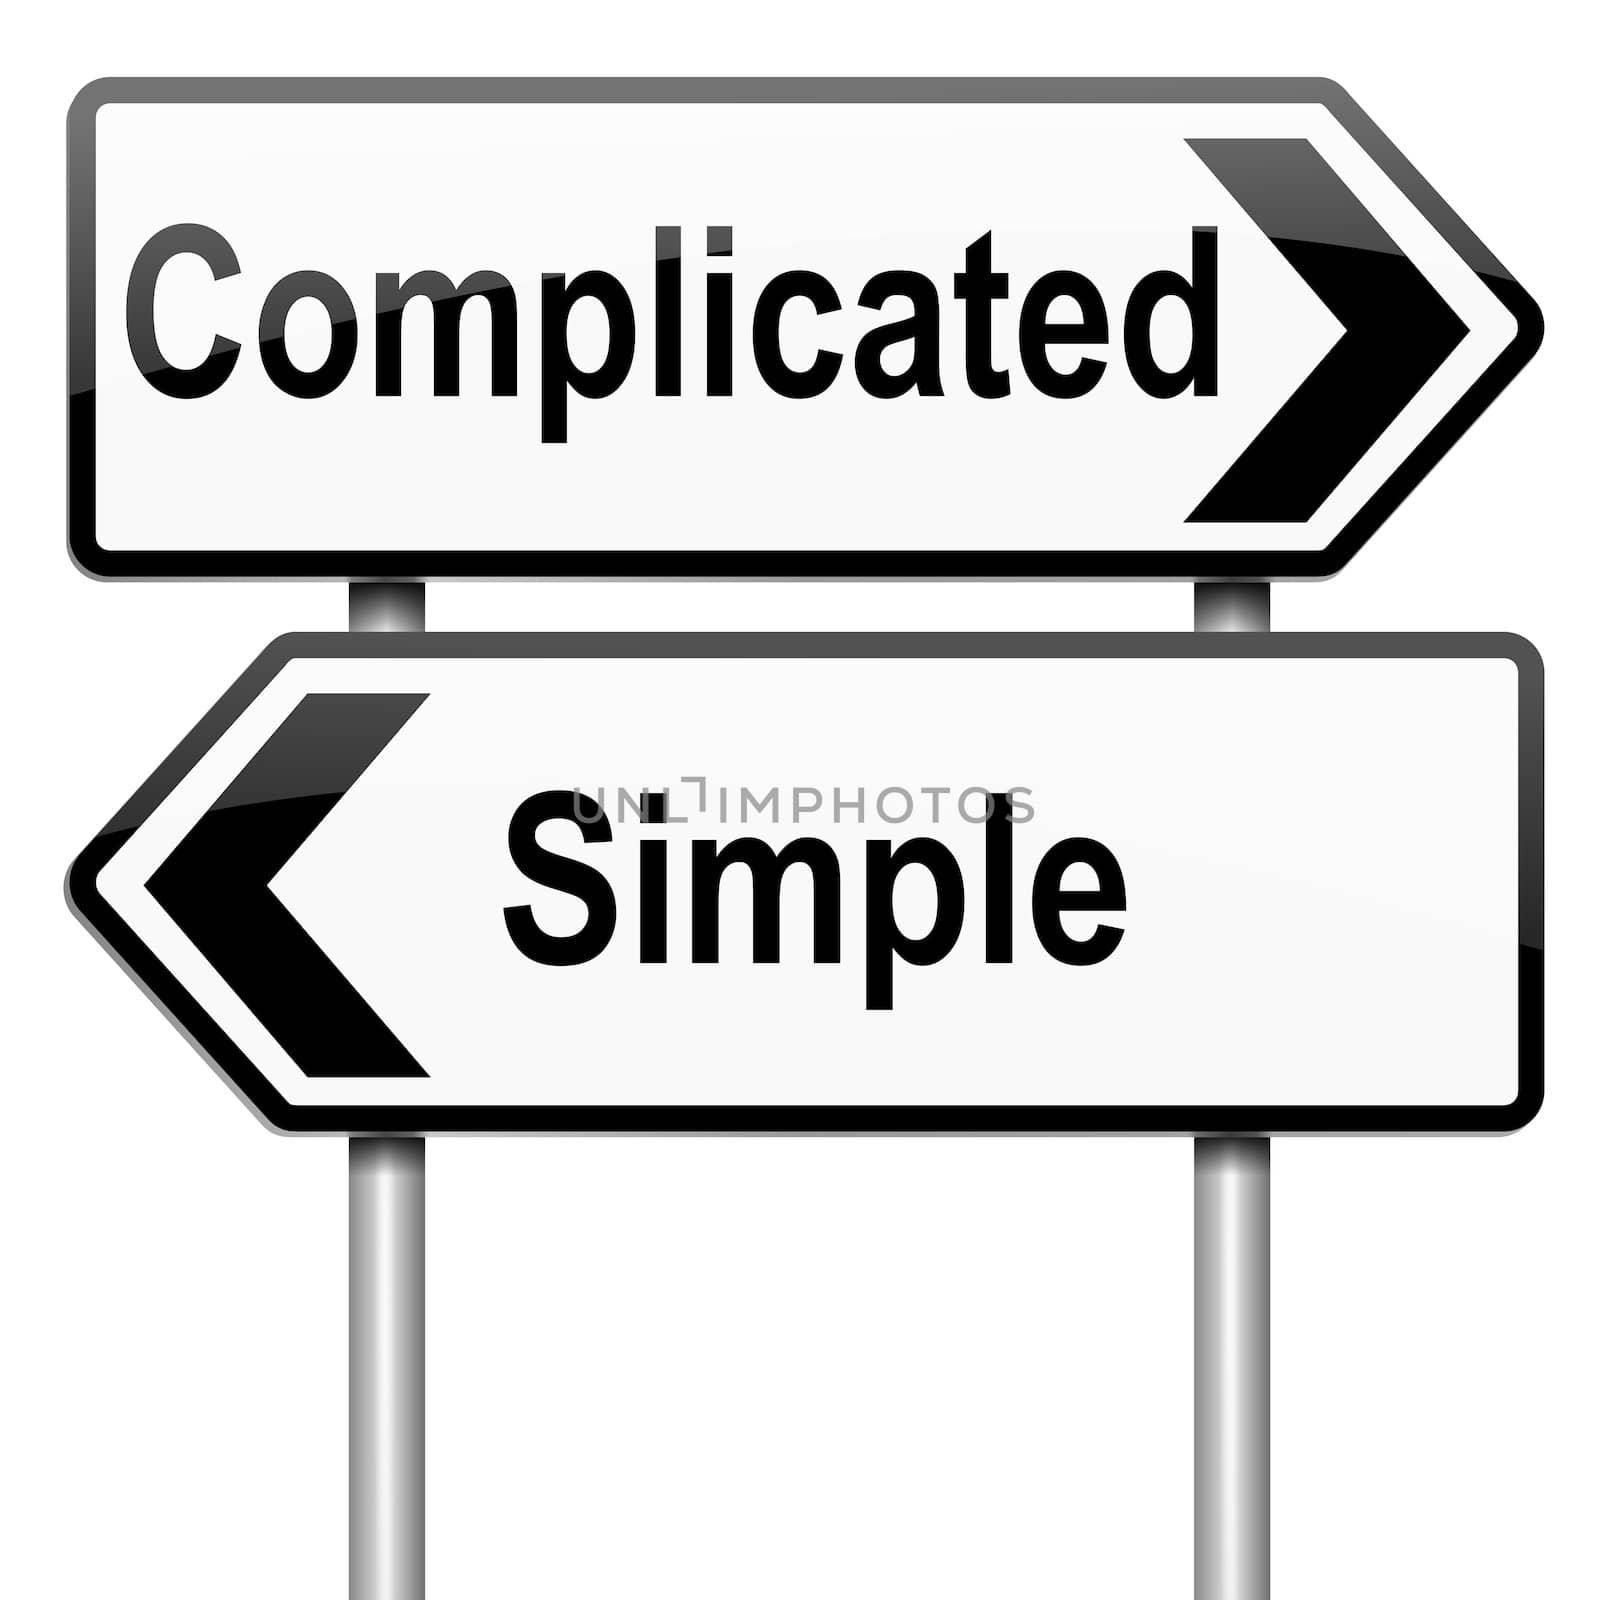 Illustration depicting a roadsign with a complicated or simple concept. White background.